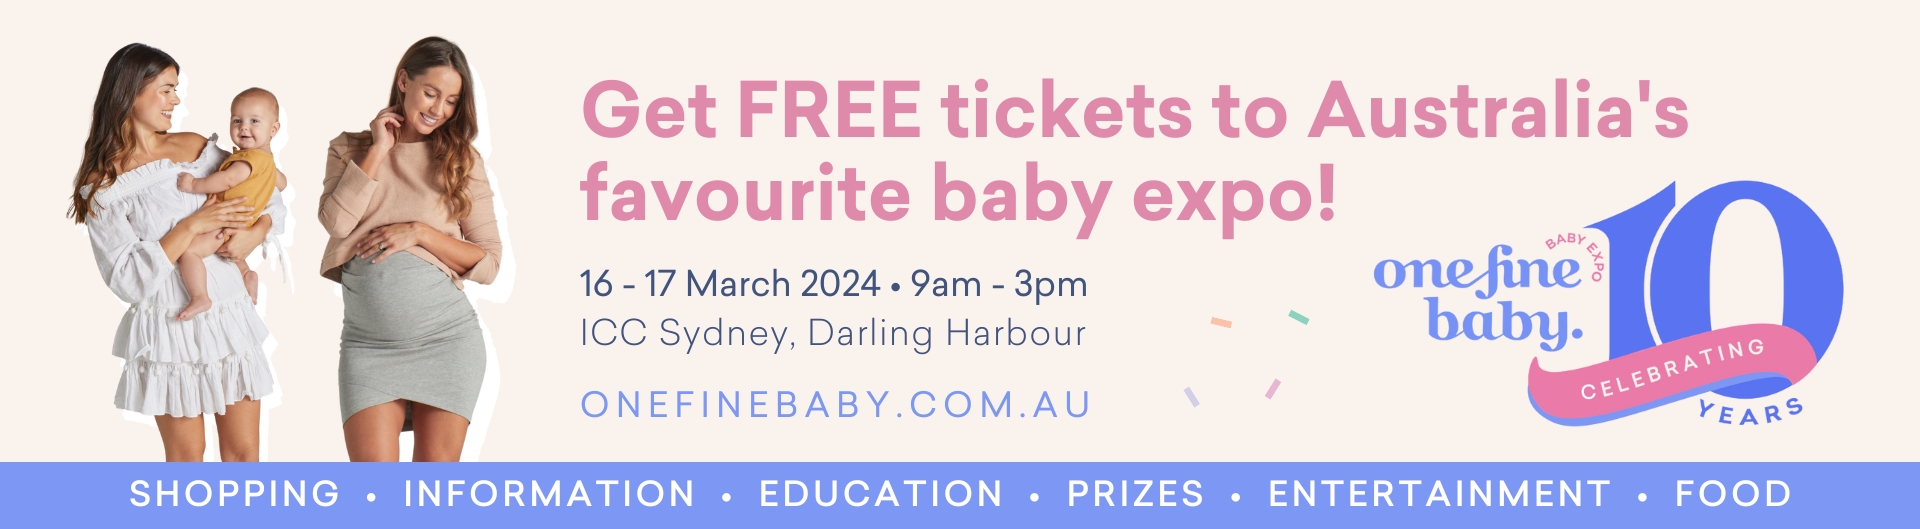 One Fine Baby Expo is coming to ICC Sydney on 16 to 17 March 2024.